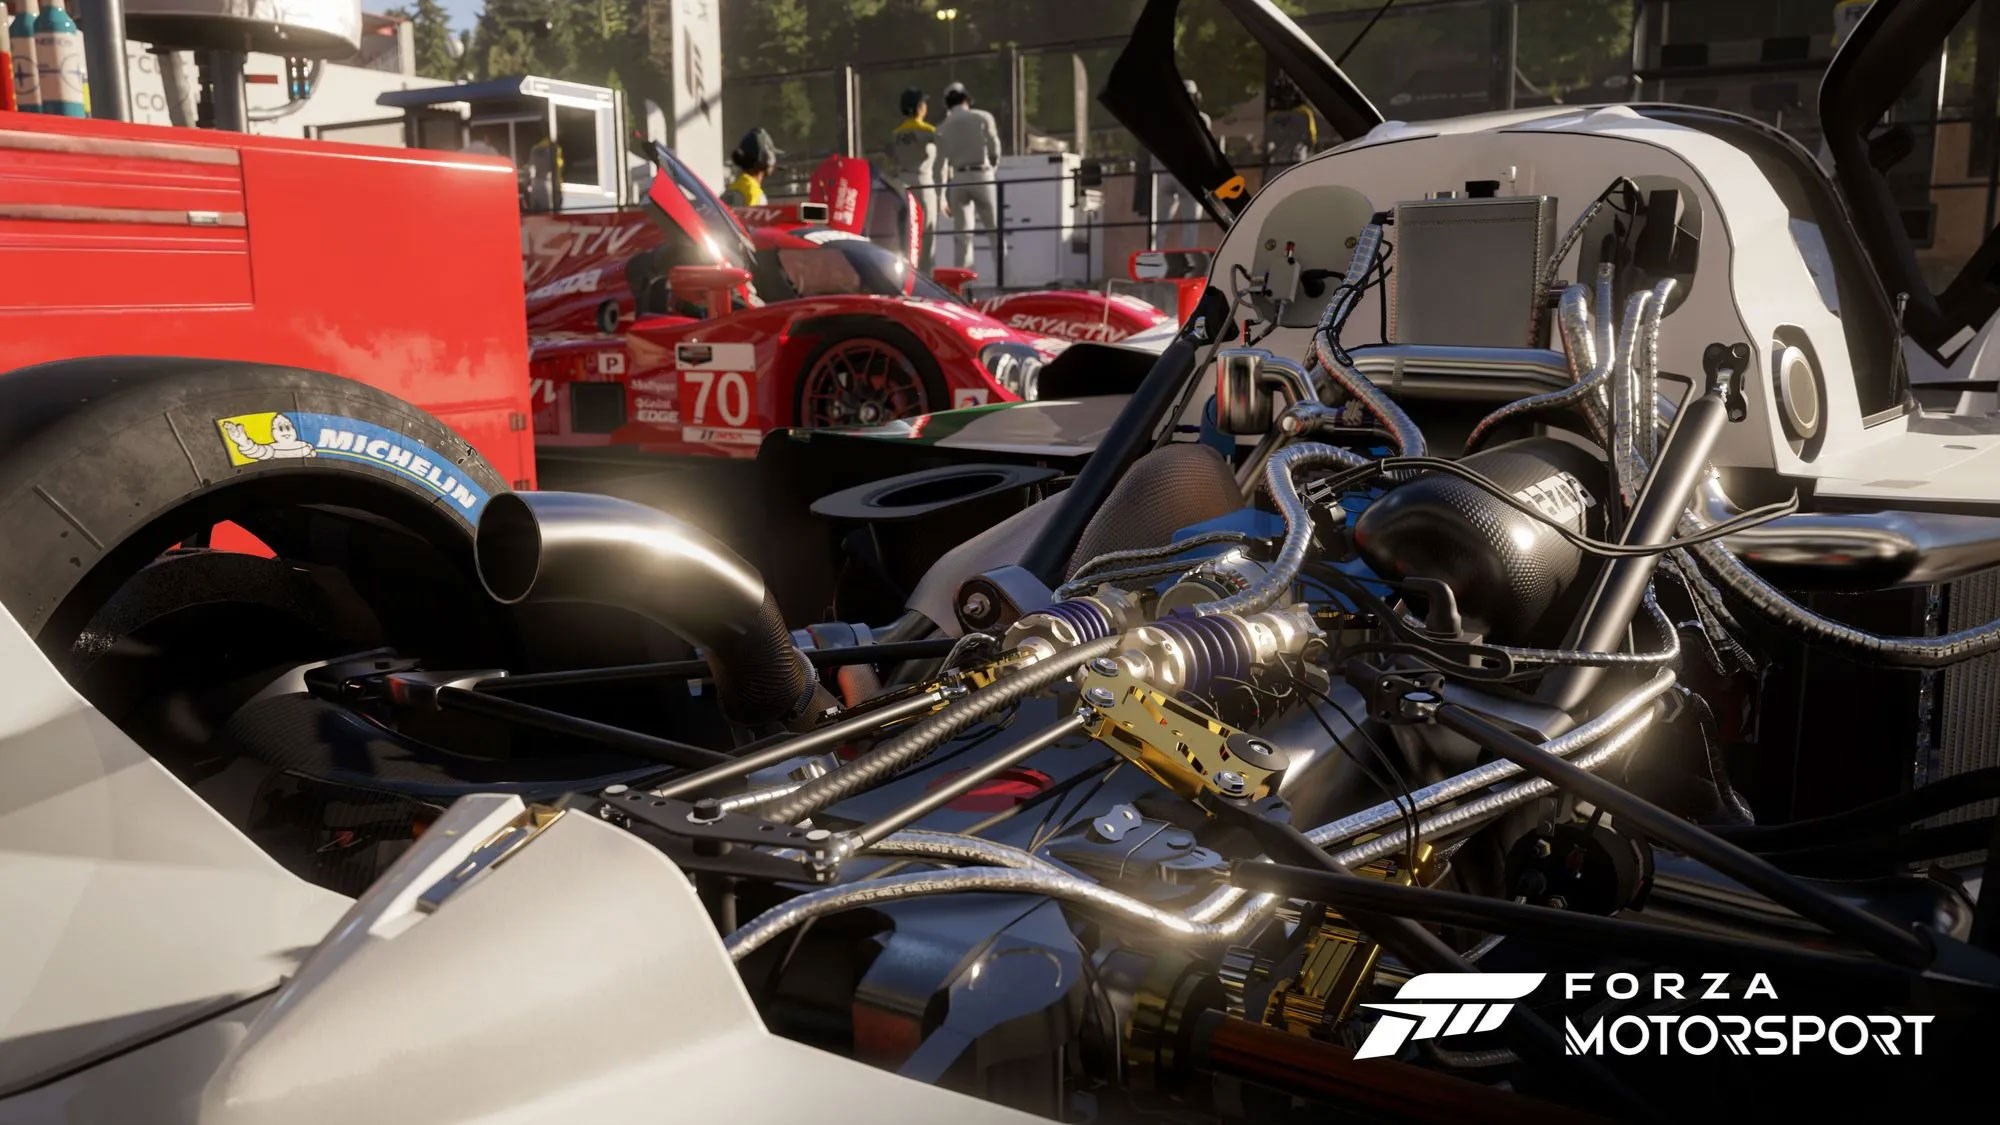 Forza Motorsport: Features, game engine & everything we know